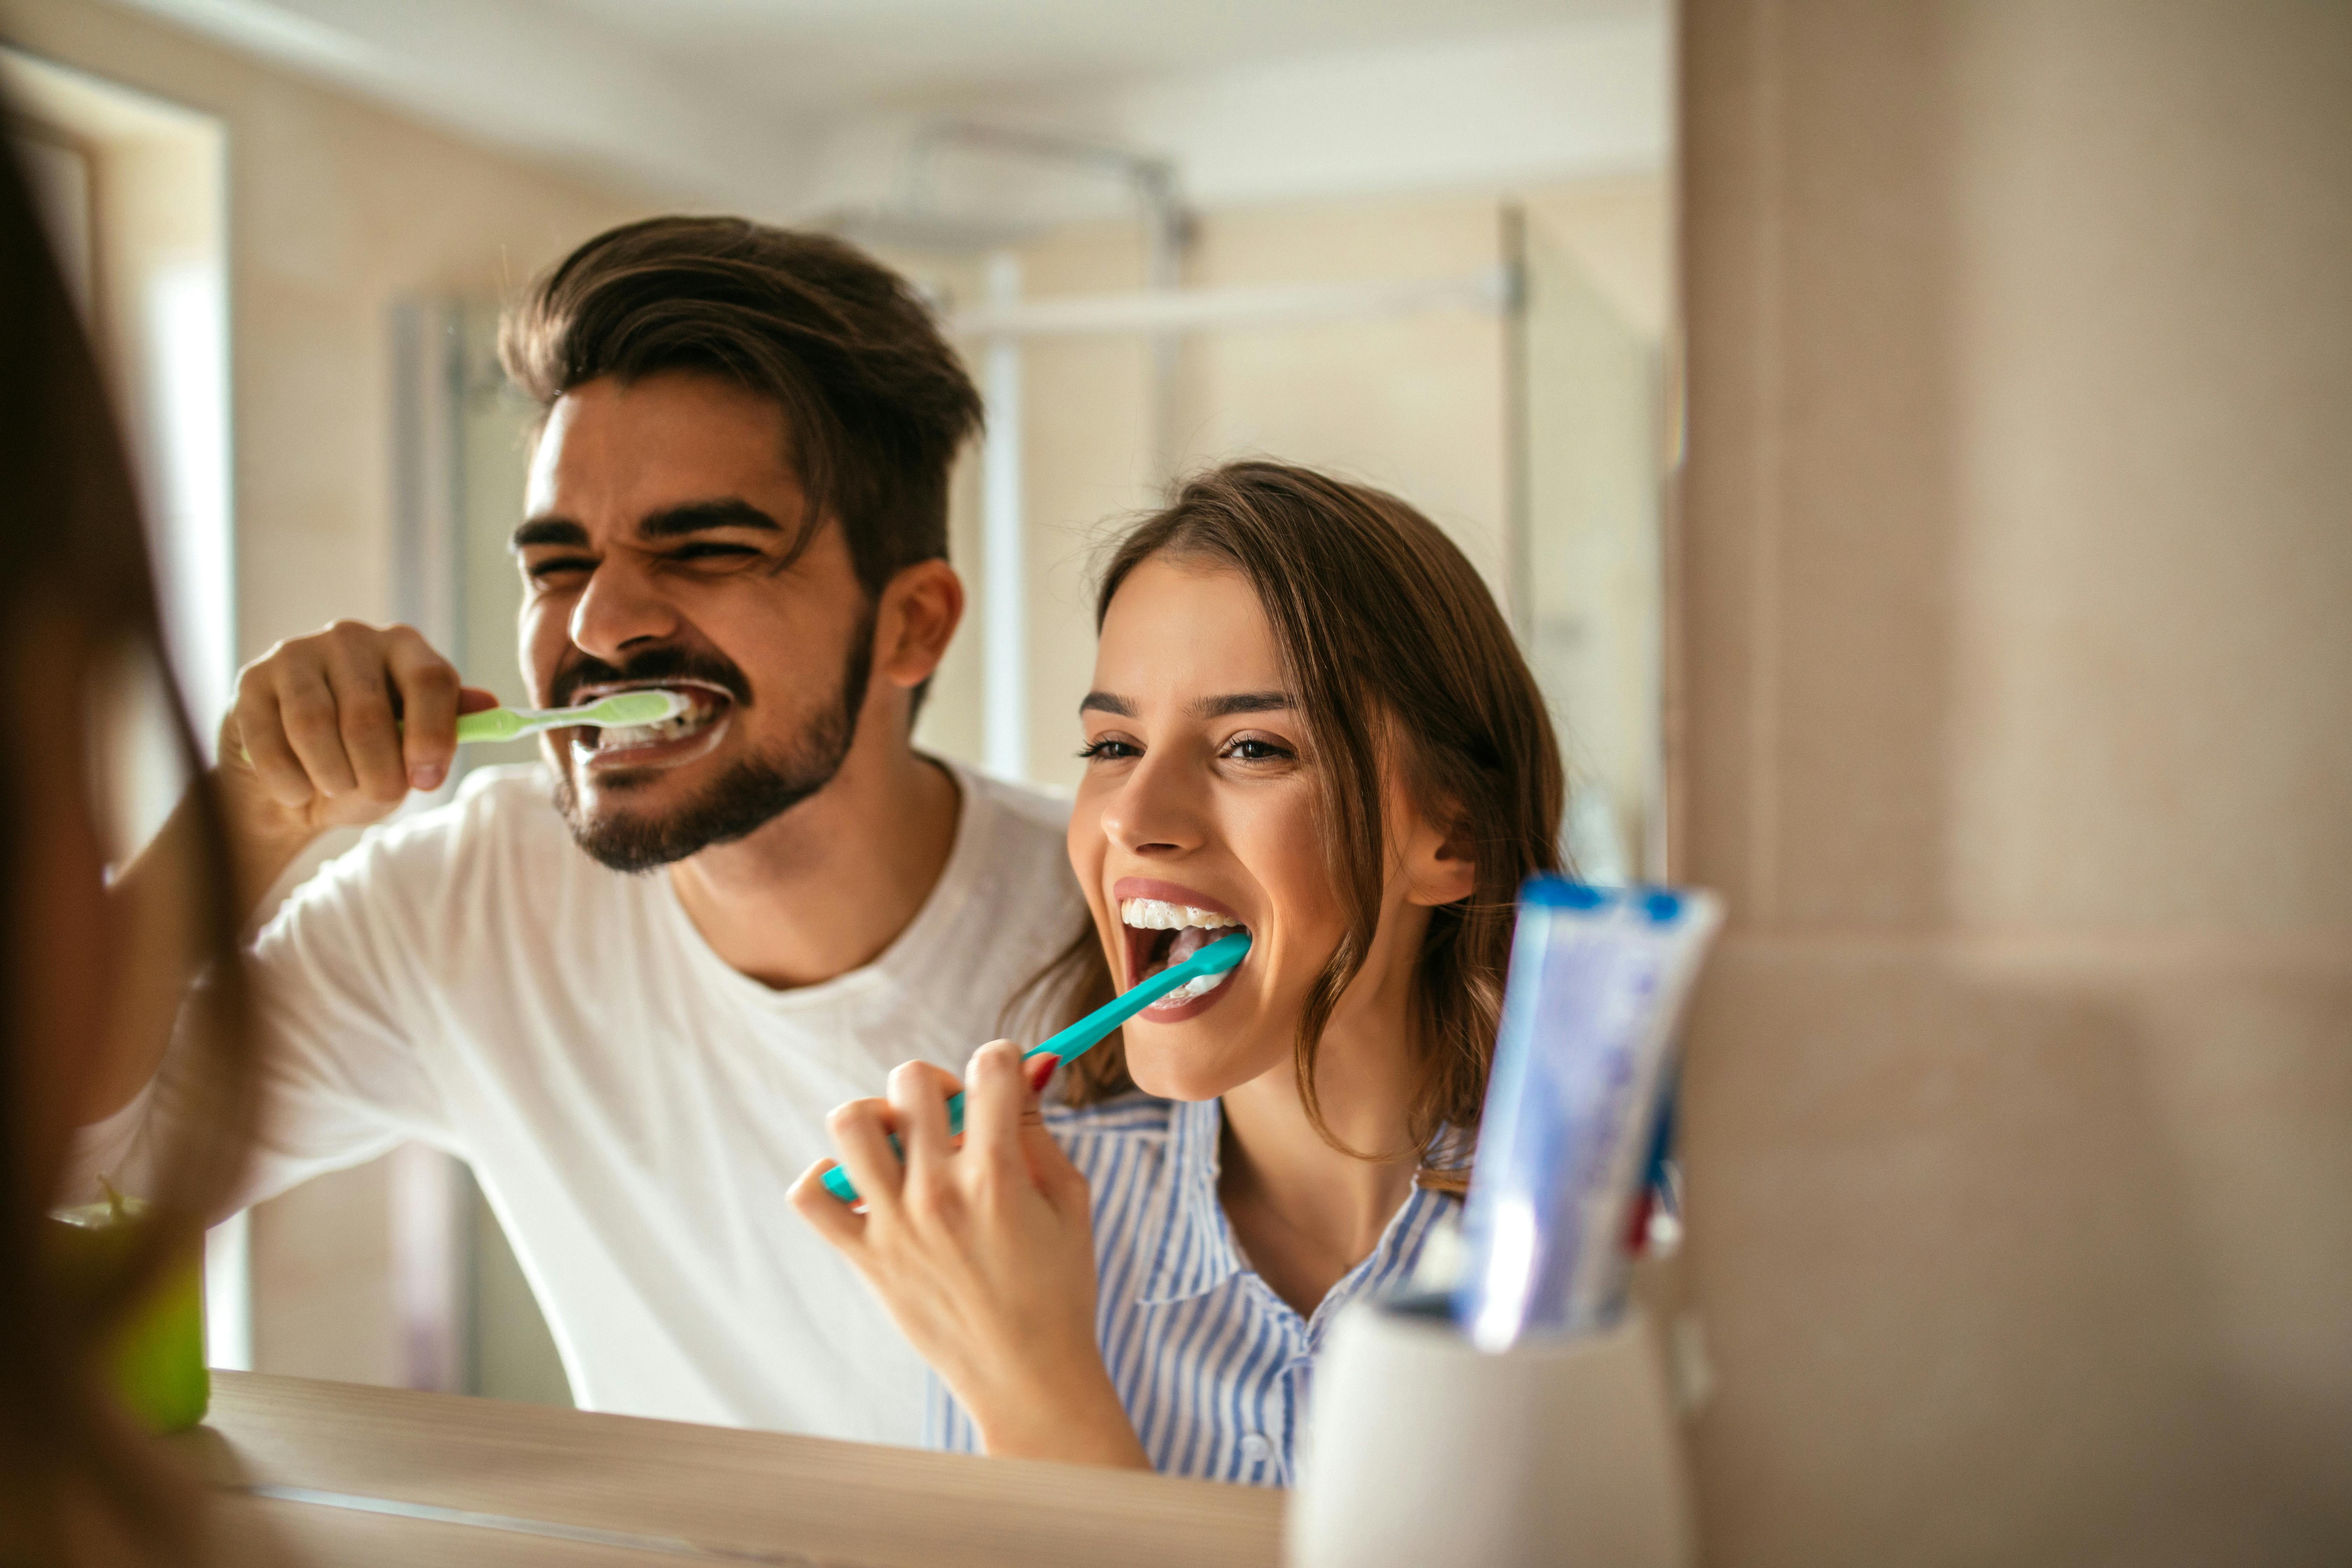 Man and woman brushing teeth in front of a mirror